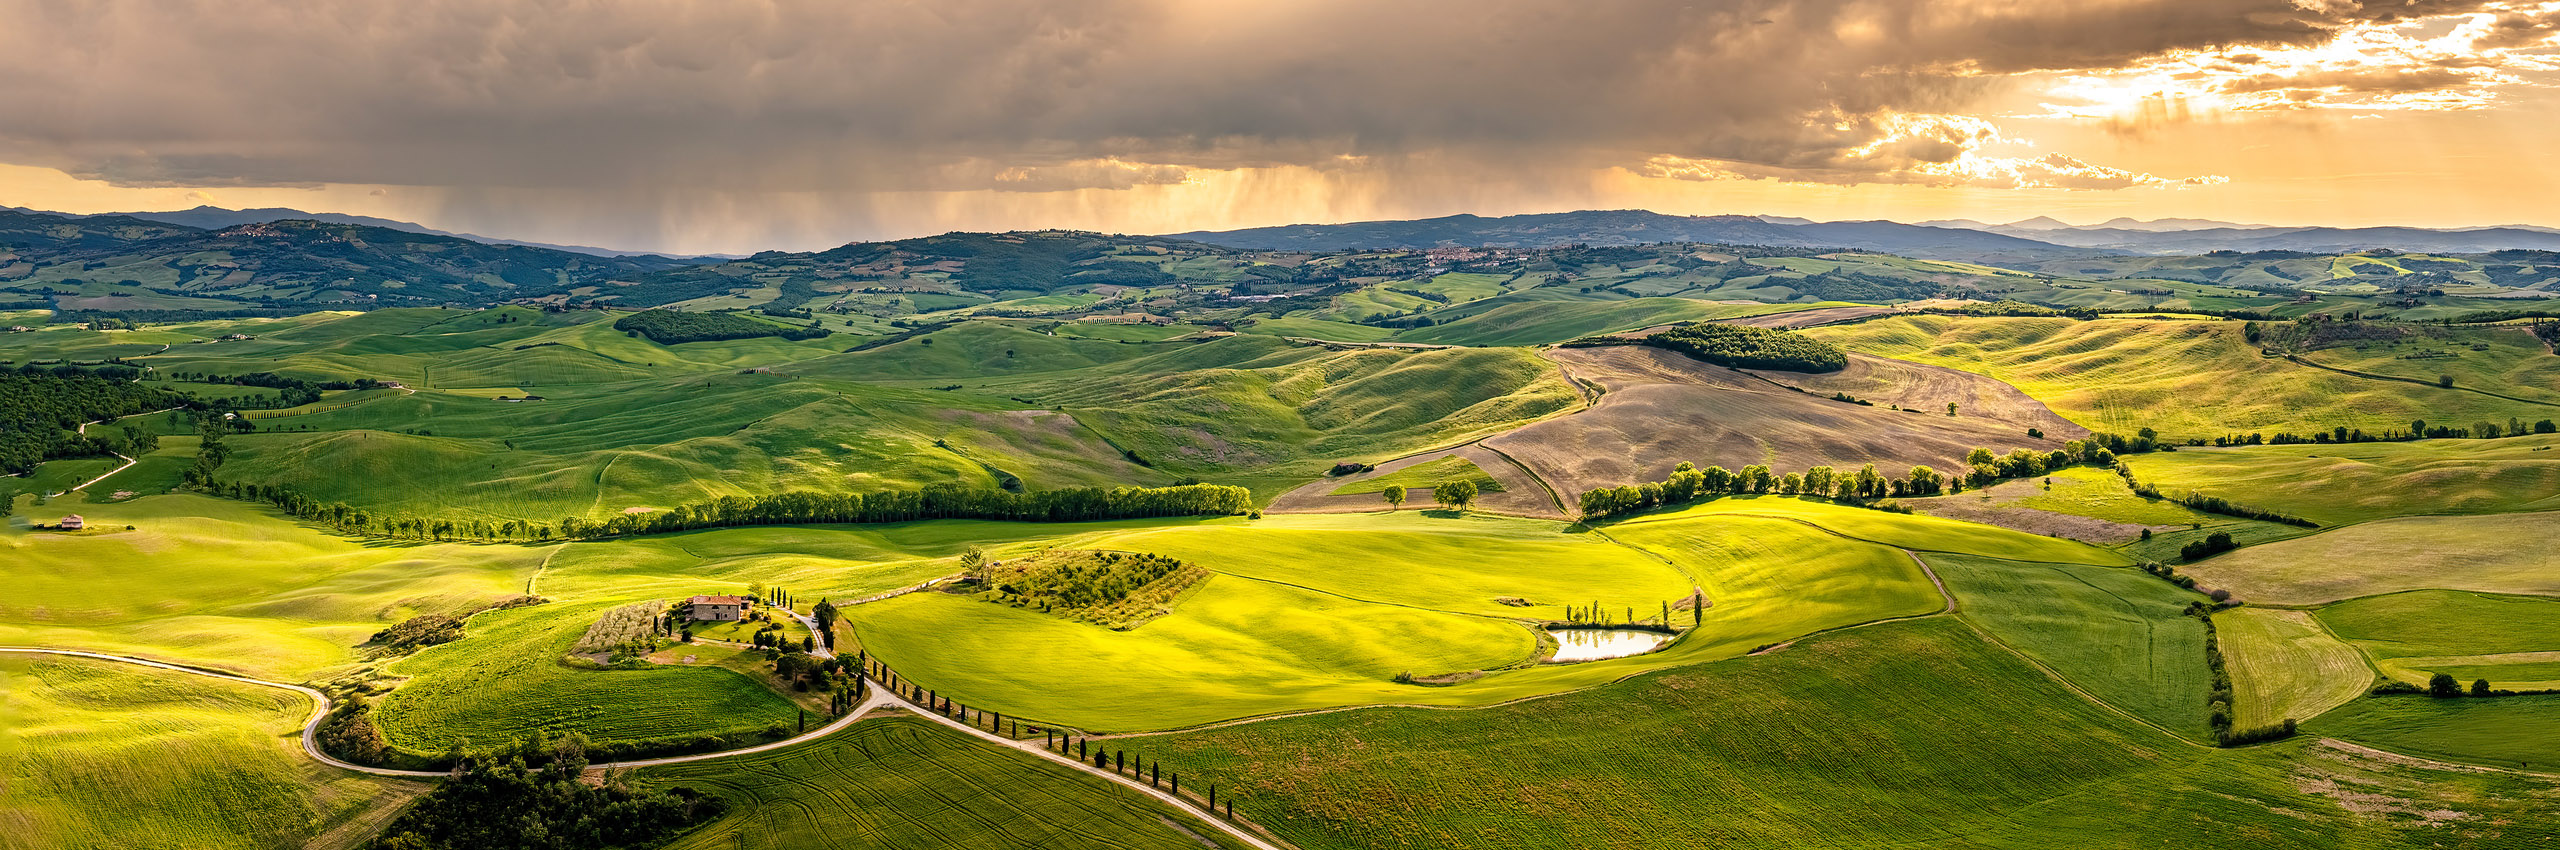 41152421 | Italy/Tuscany, Siena district, Orcia Valley, Pienza | © Paolo Evangelista/HUBER IMAGES